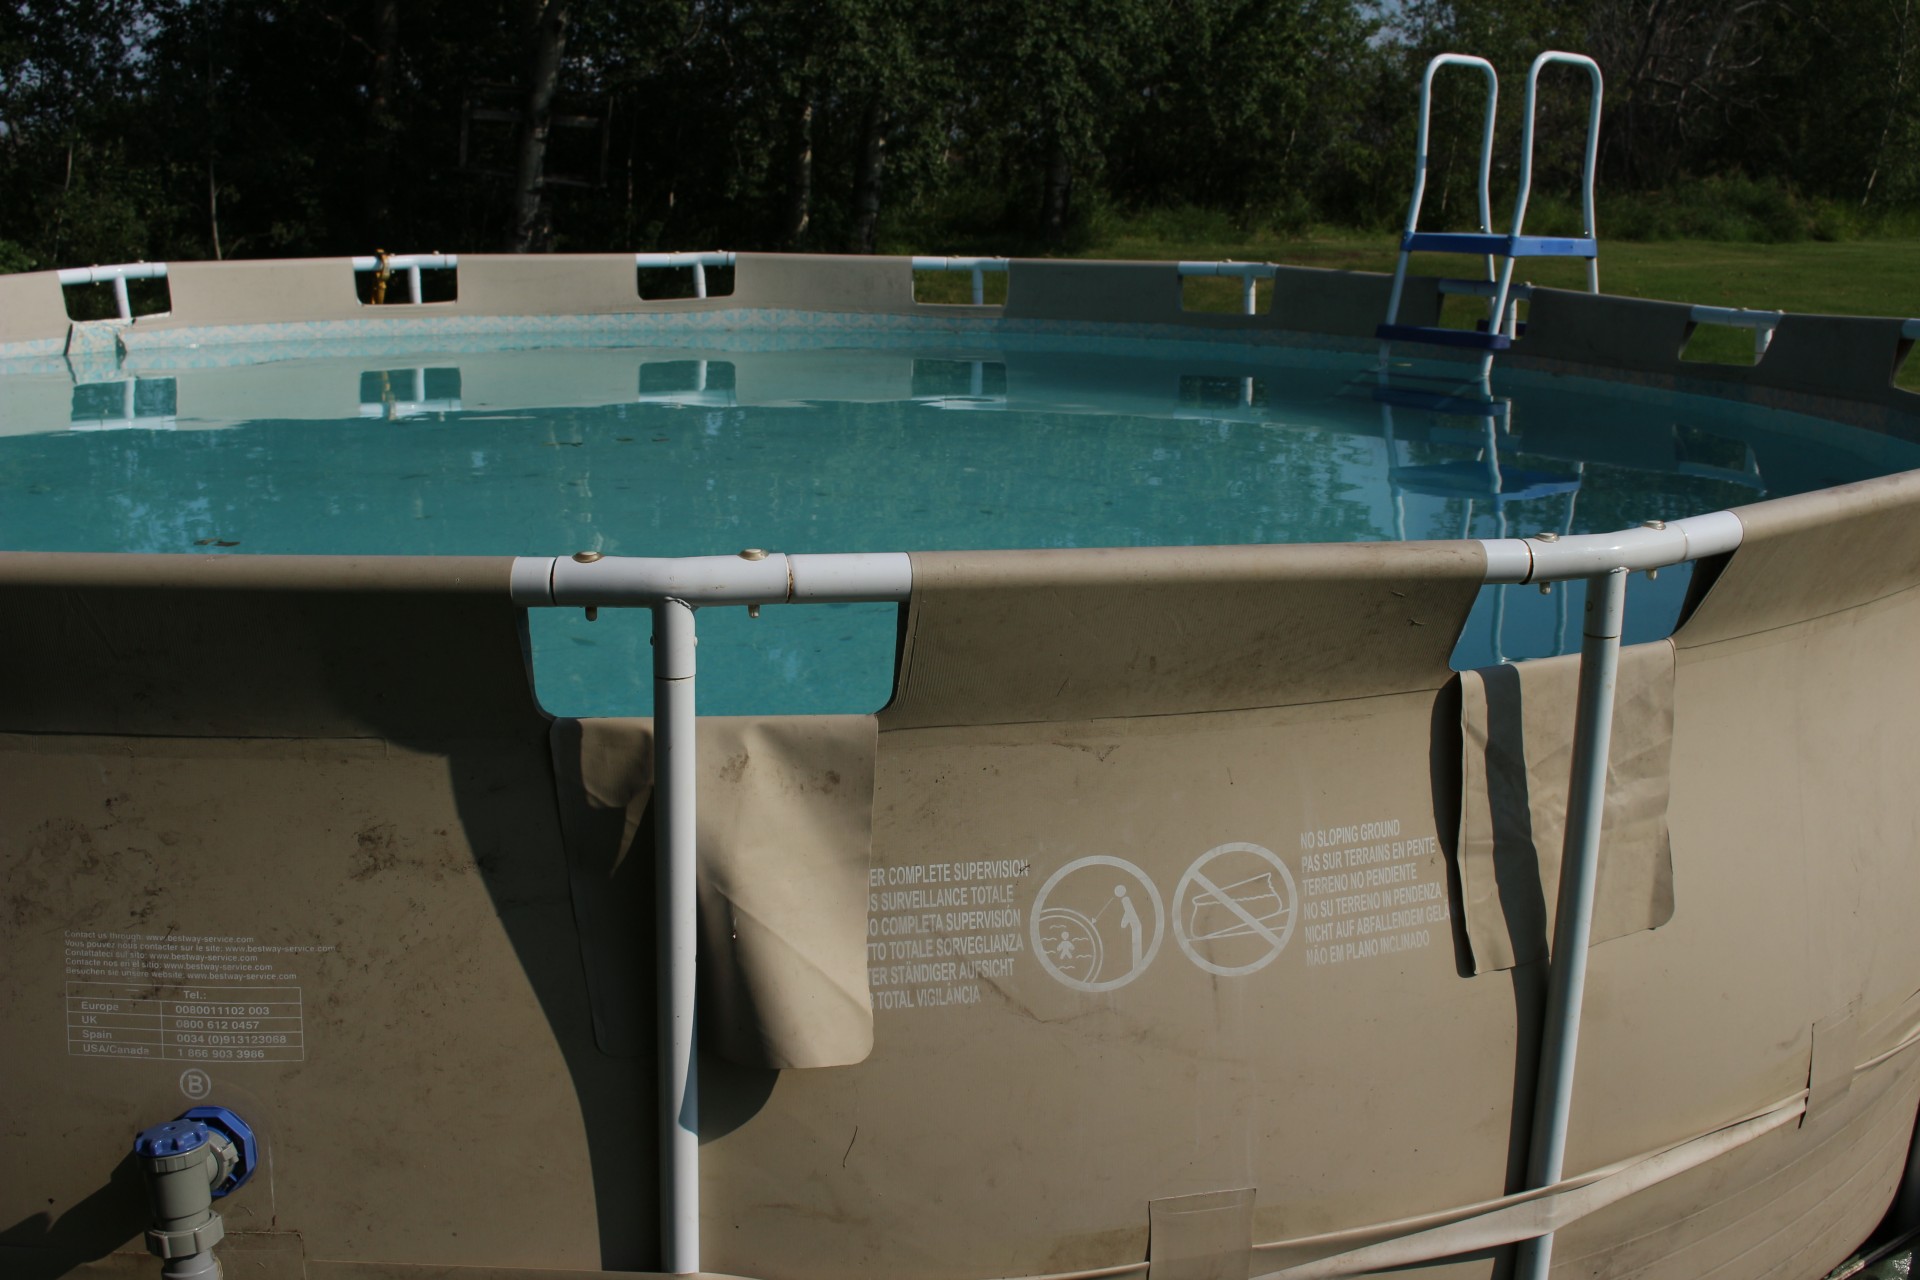 Unlevel Above Ground Pool Is Higher on One Side